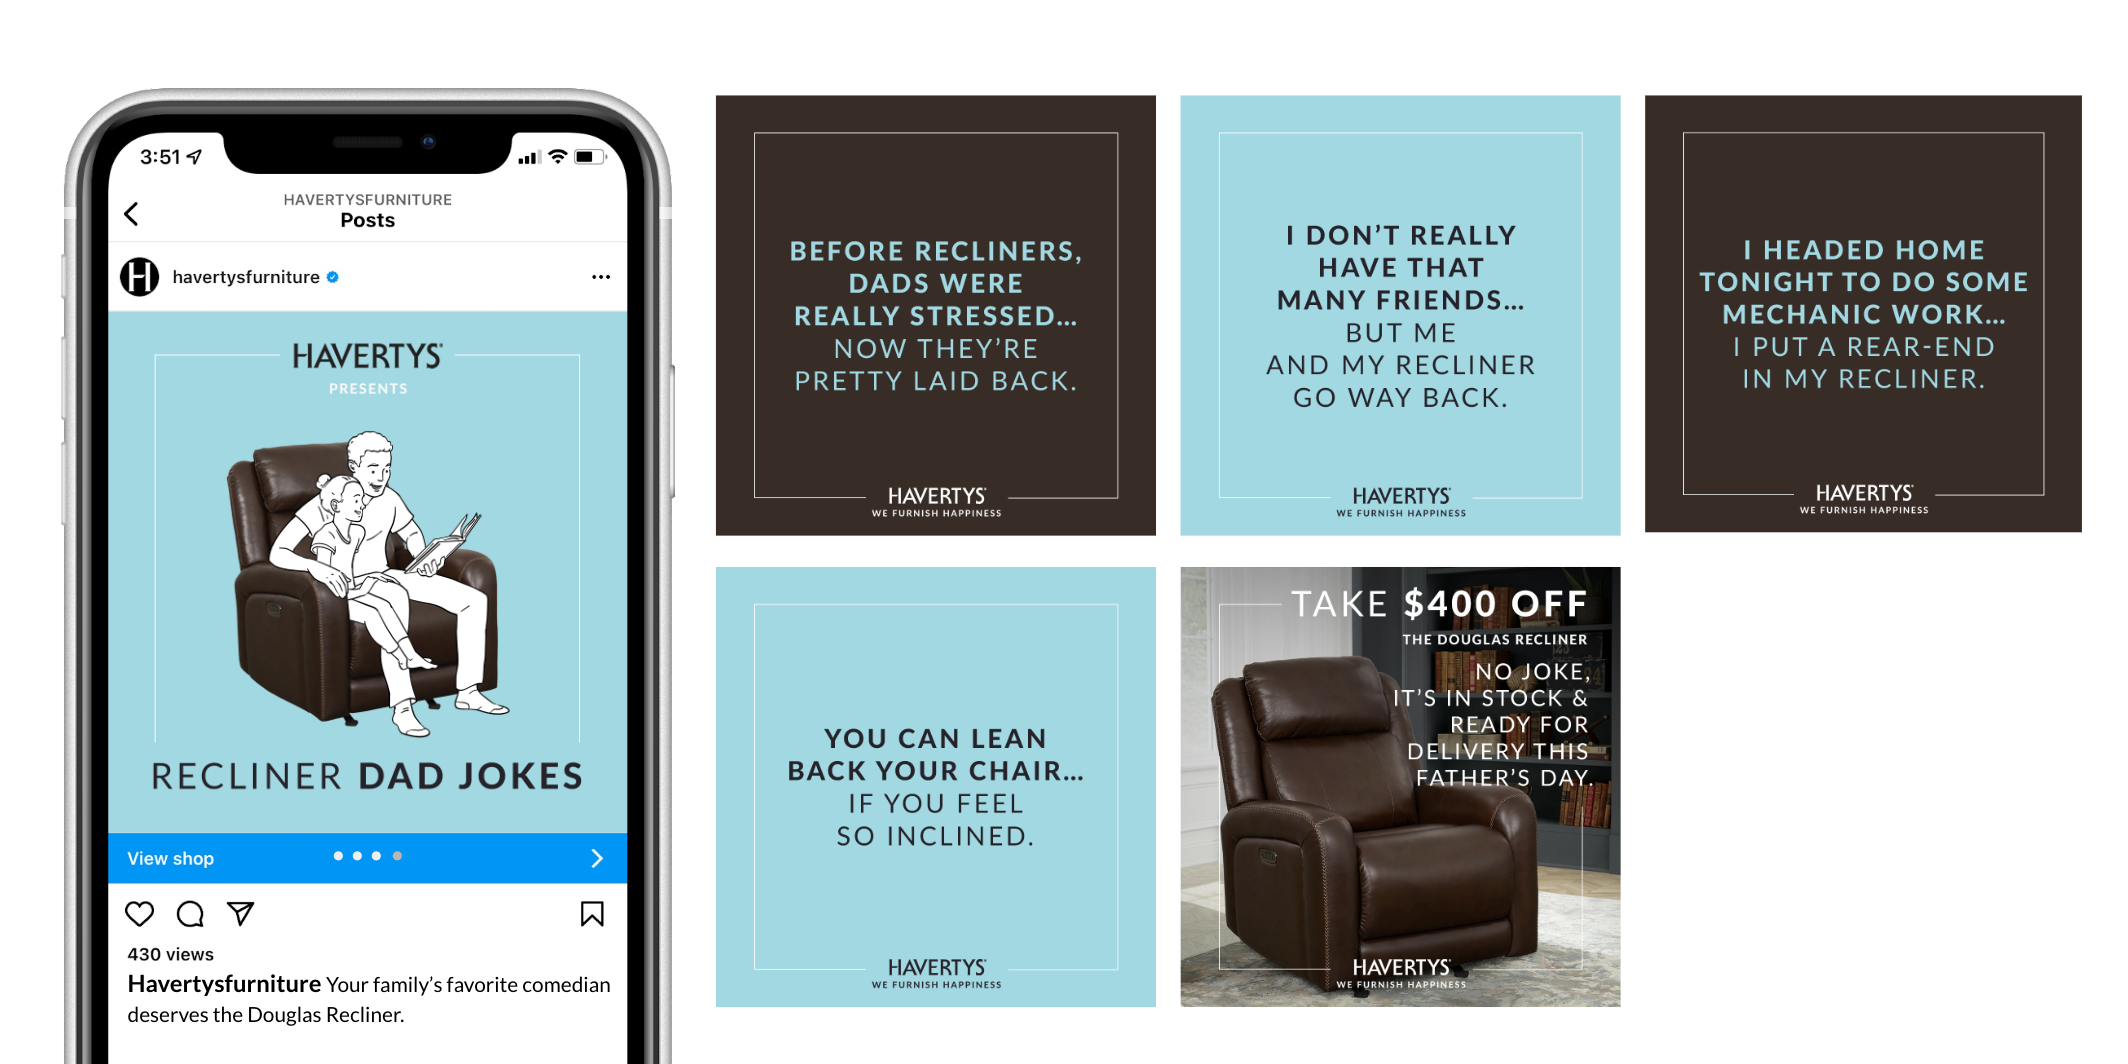 Using dad jokes to sell recliners